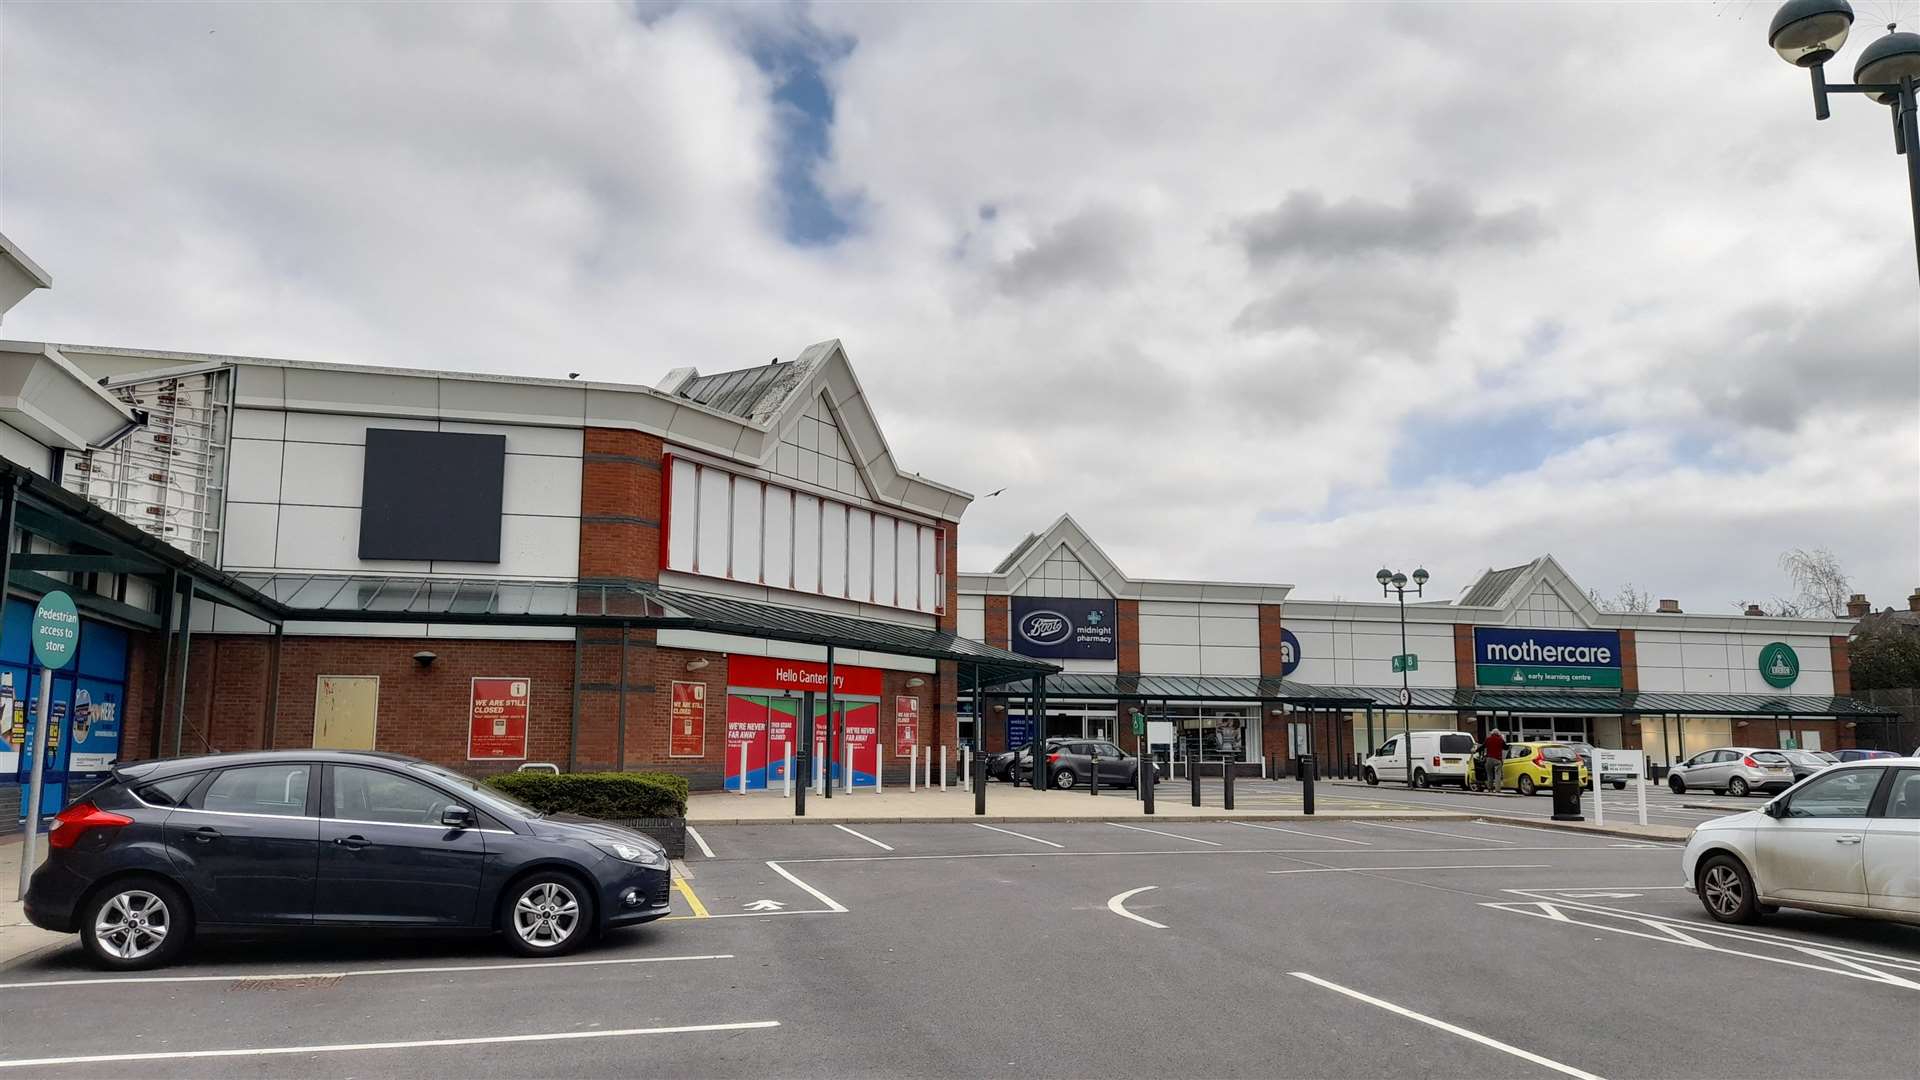 The new Wincheap takeaway is planned for Wincheap Retail Park, which is currently half-empty